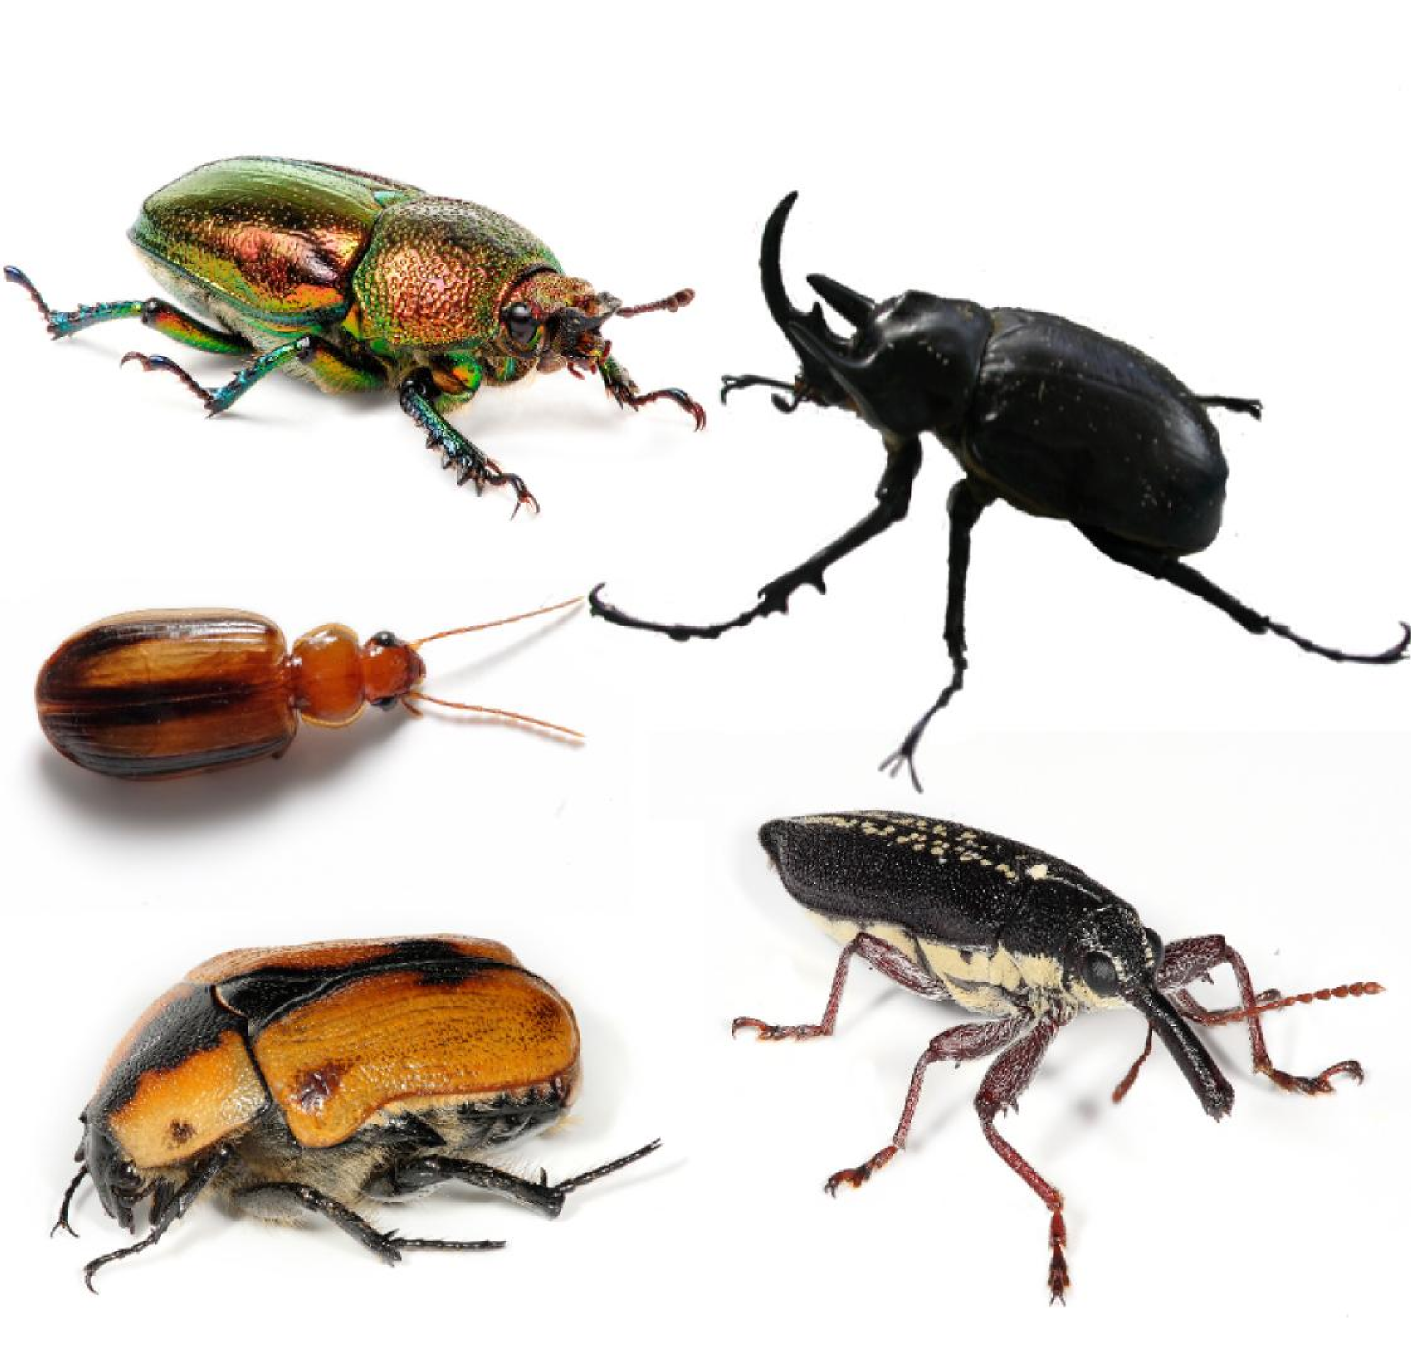 File:Coleoptera collage.png - Wikimedia Commons